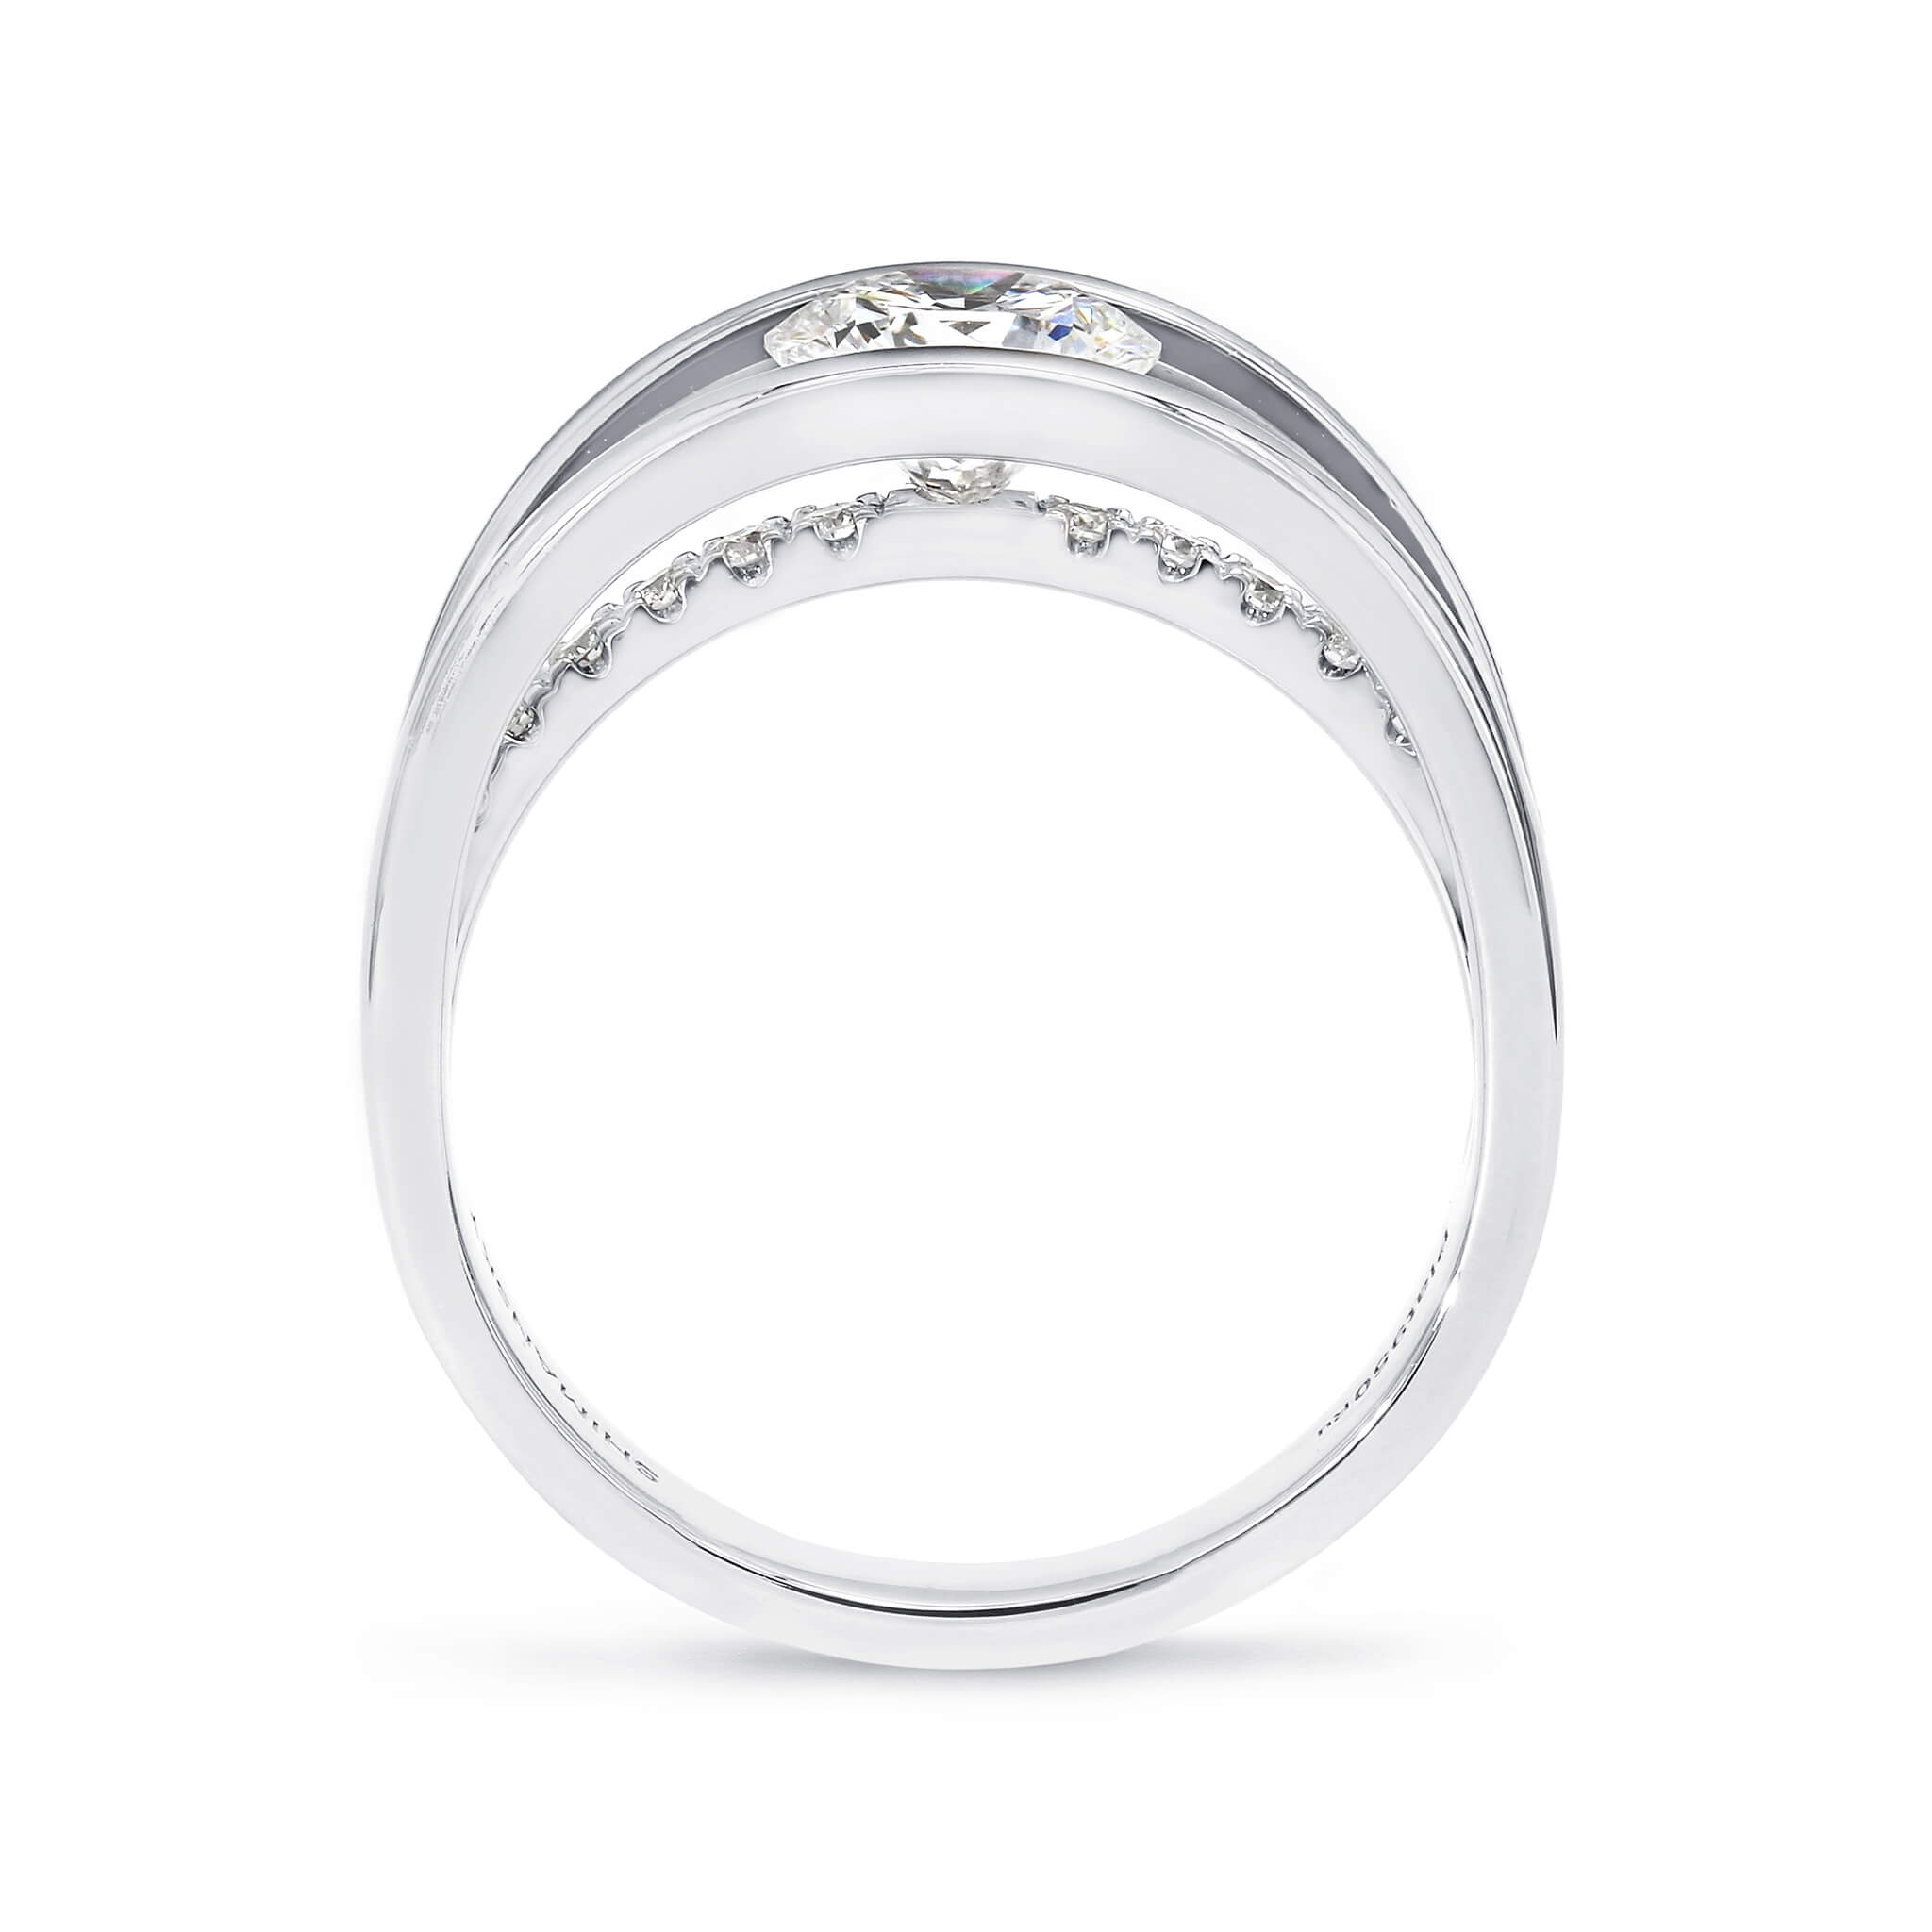 Evolym Diamond Engagement Ring 1.00 Carat in 18K White Gold Side View